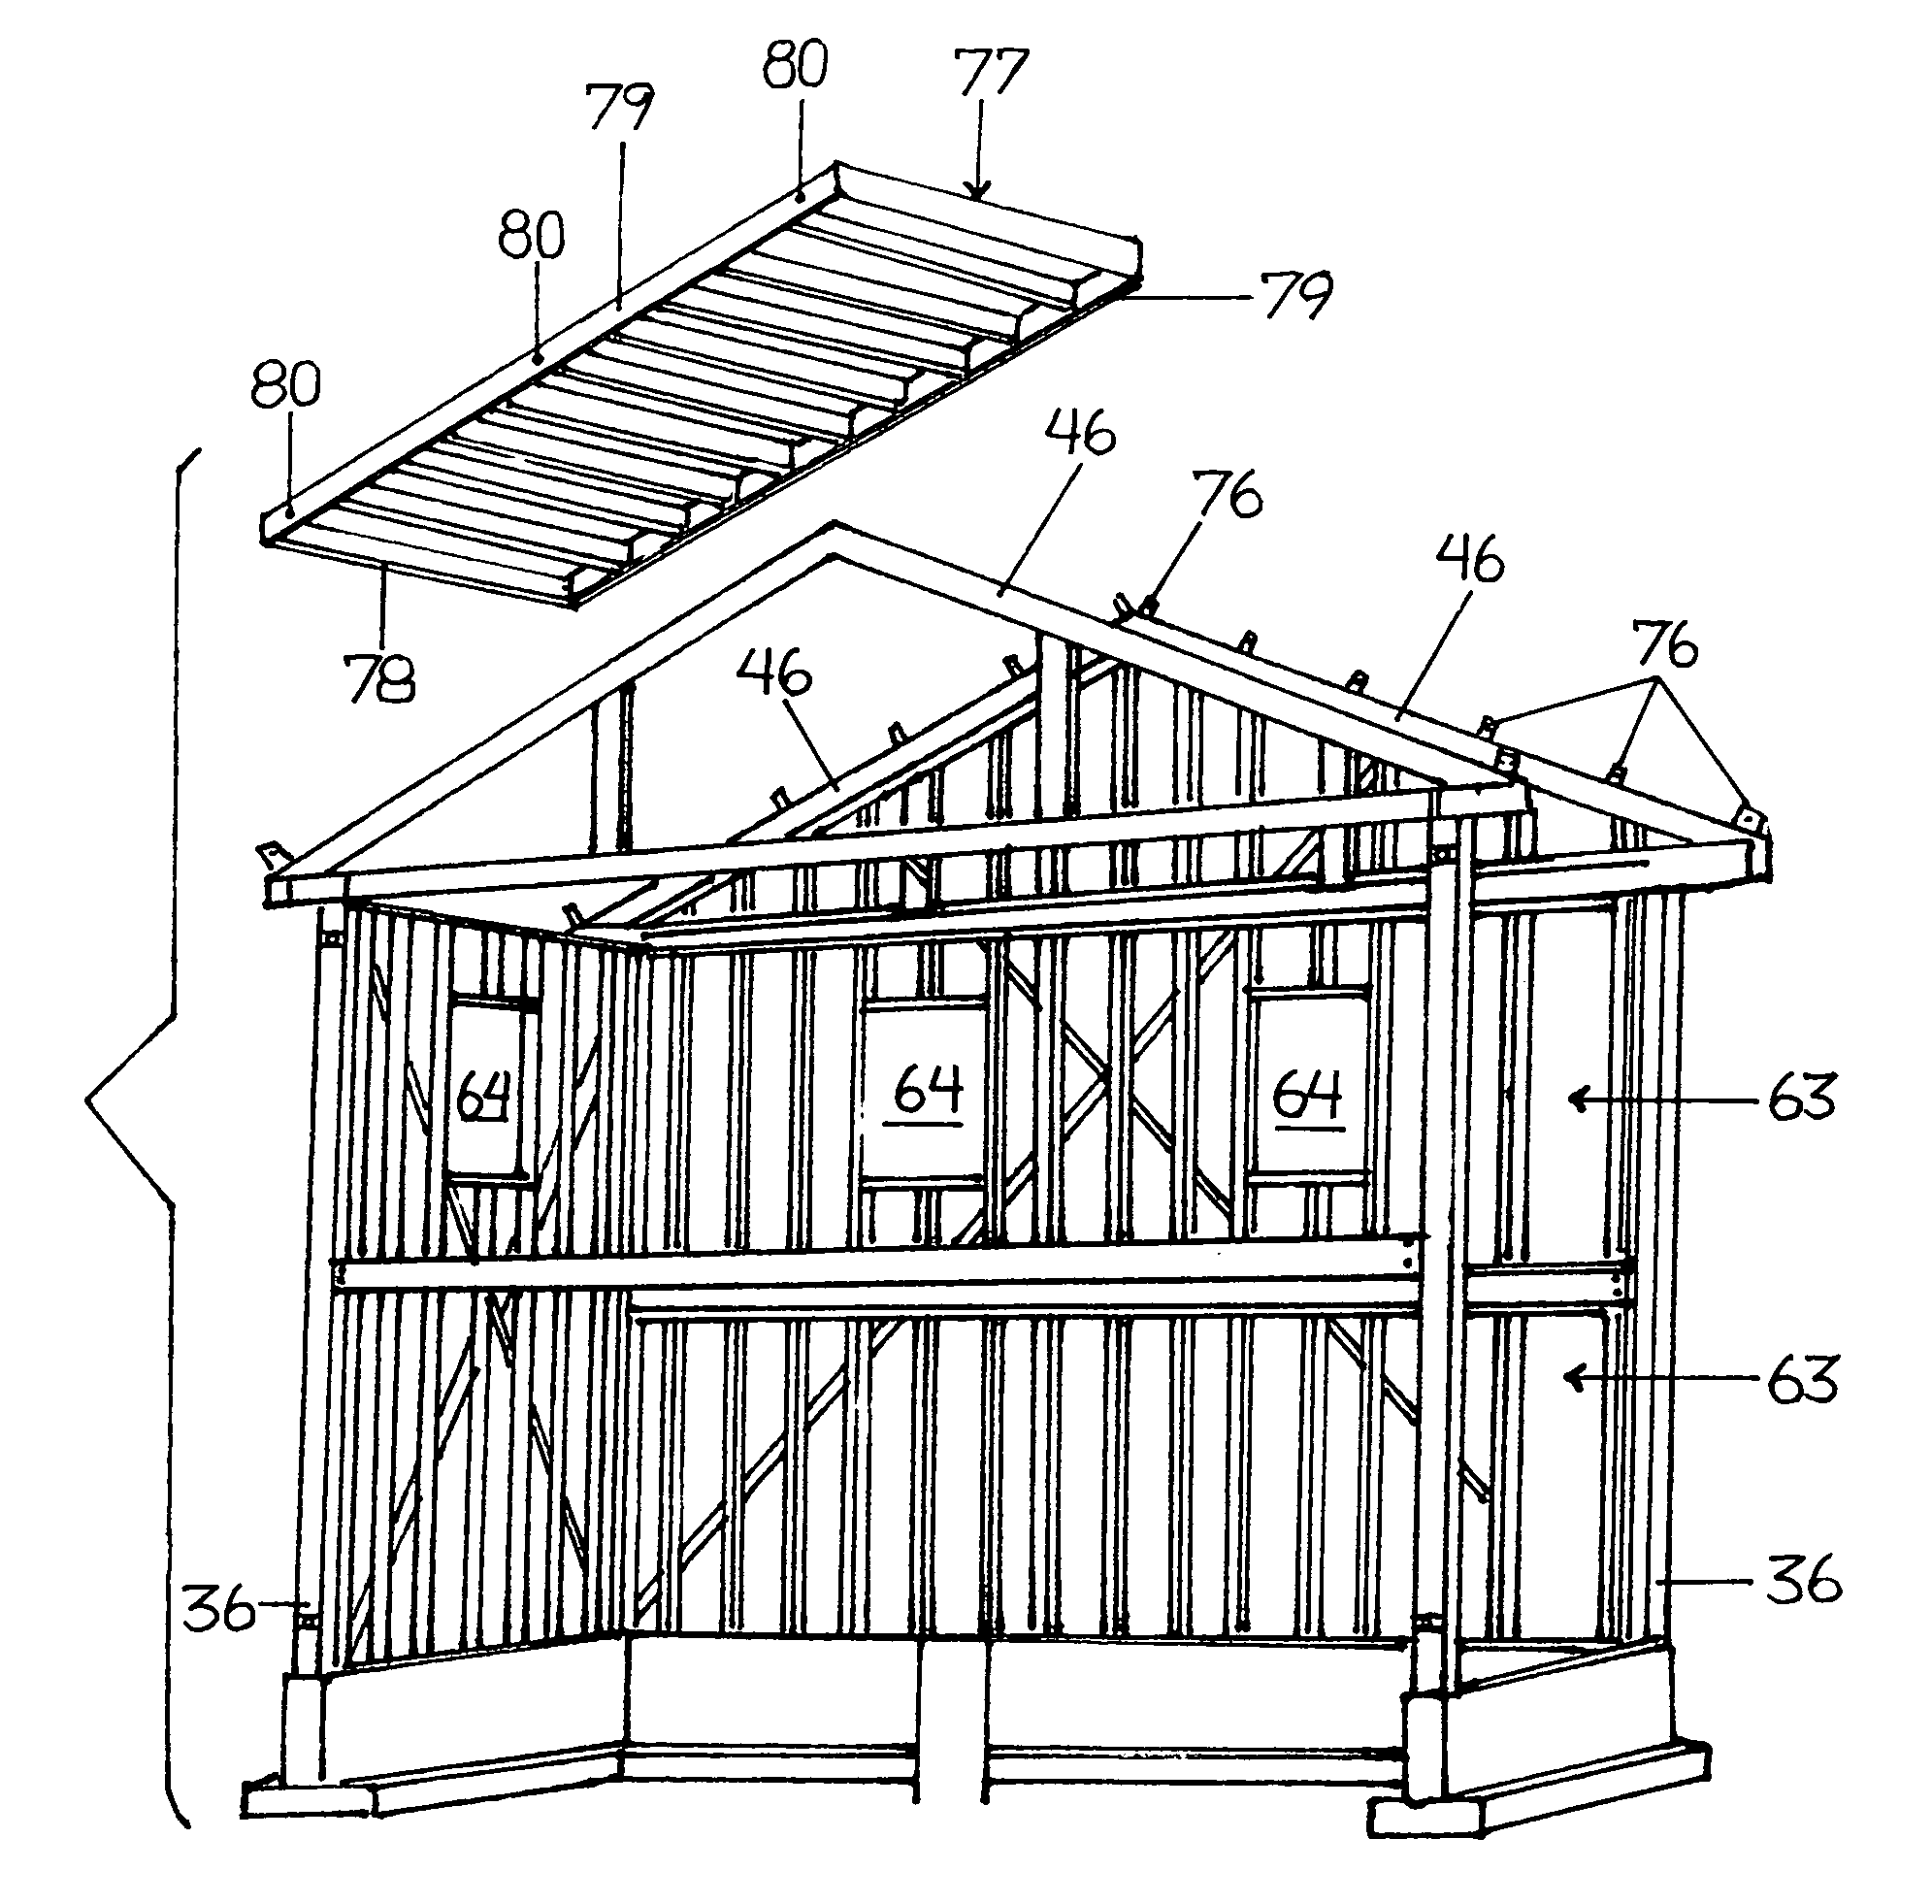 Structural steel framed houses with gable end frames, intermediate frames, and wall and roof panels having perimeters of C-shaped steel channels